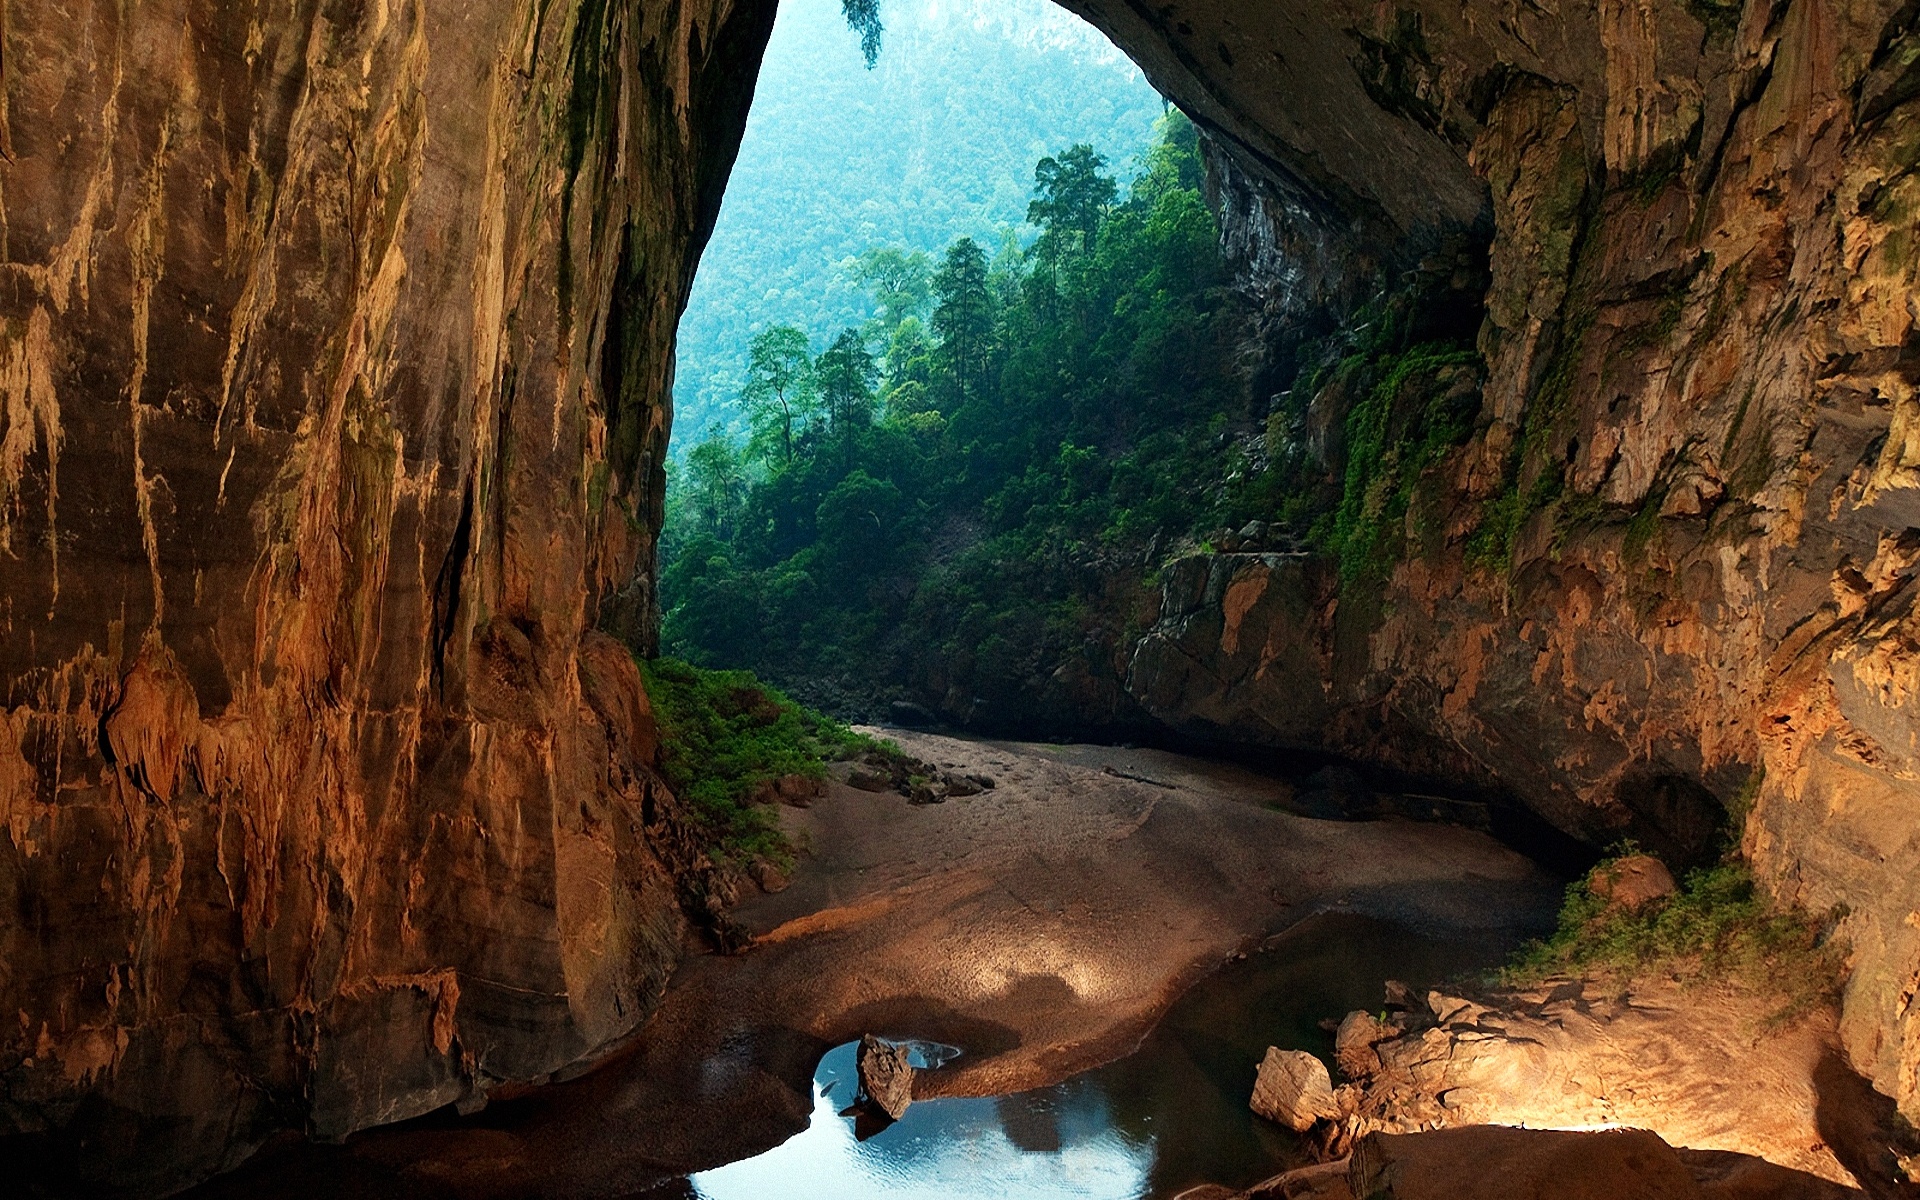 From March to August is said to be the best time to explore Son Doong Cave, especially between March and April when the temperature is more pleasant, ...